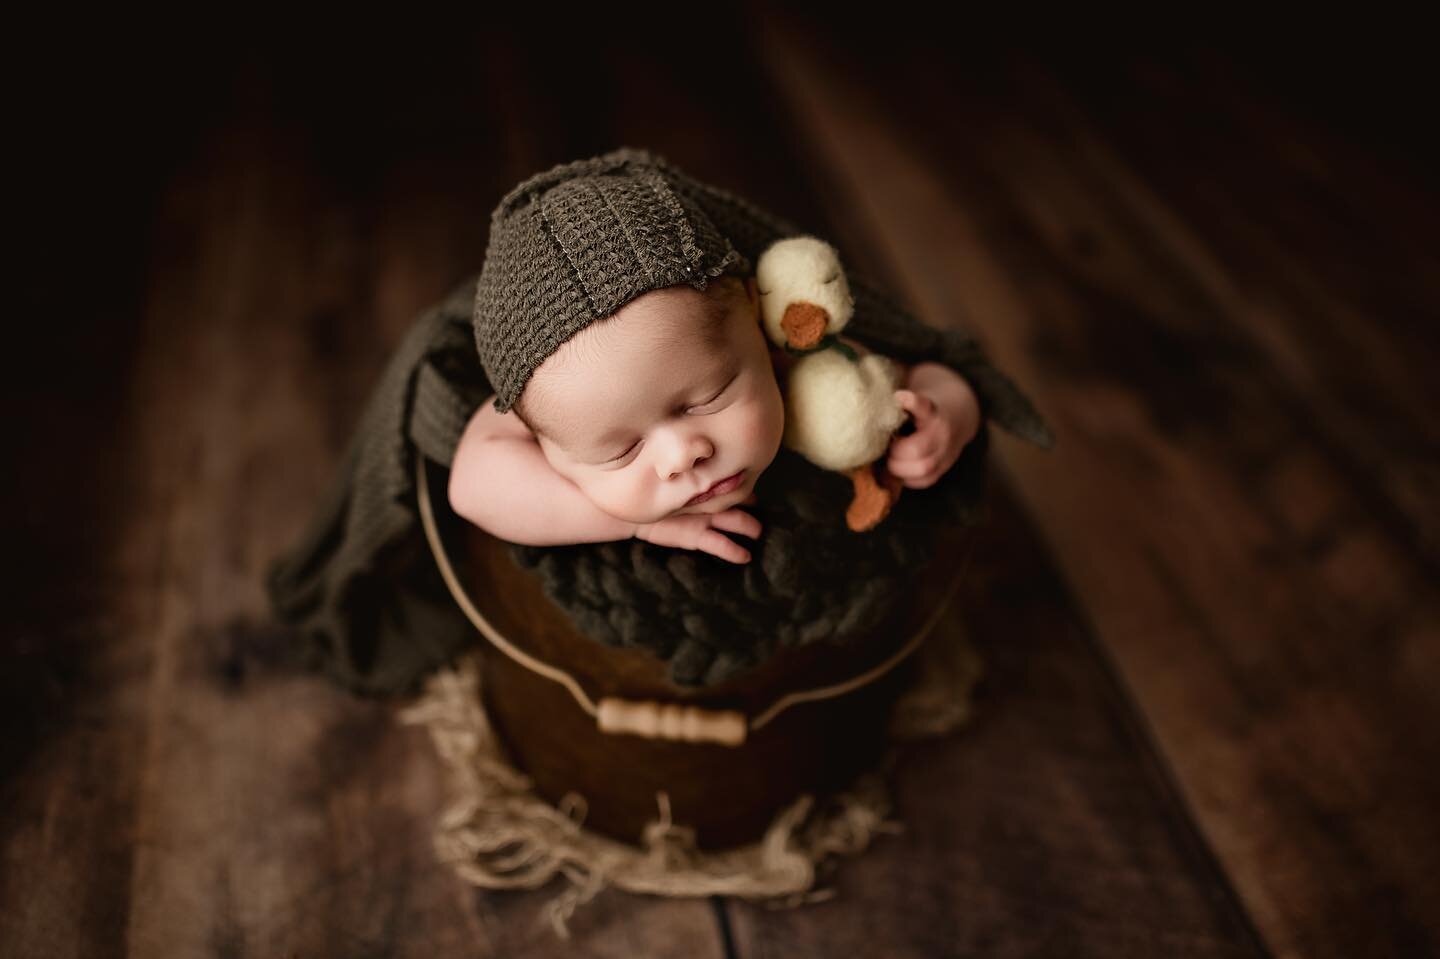 🐥🐥🐥

How cute is this little guy?! The way we got him holding the little duck melts my heart. Grandma was so excited for this shot and he did so well..slept right through it! Babies in buckets are our specialty 😁 love these setups! We have so man